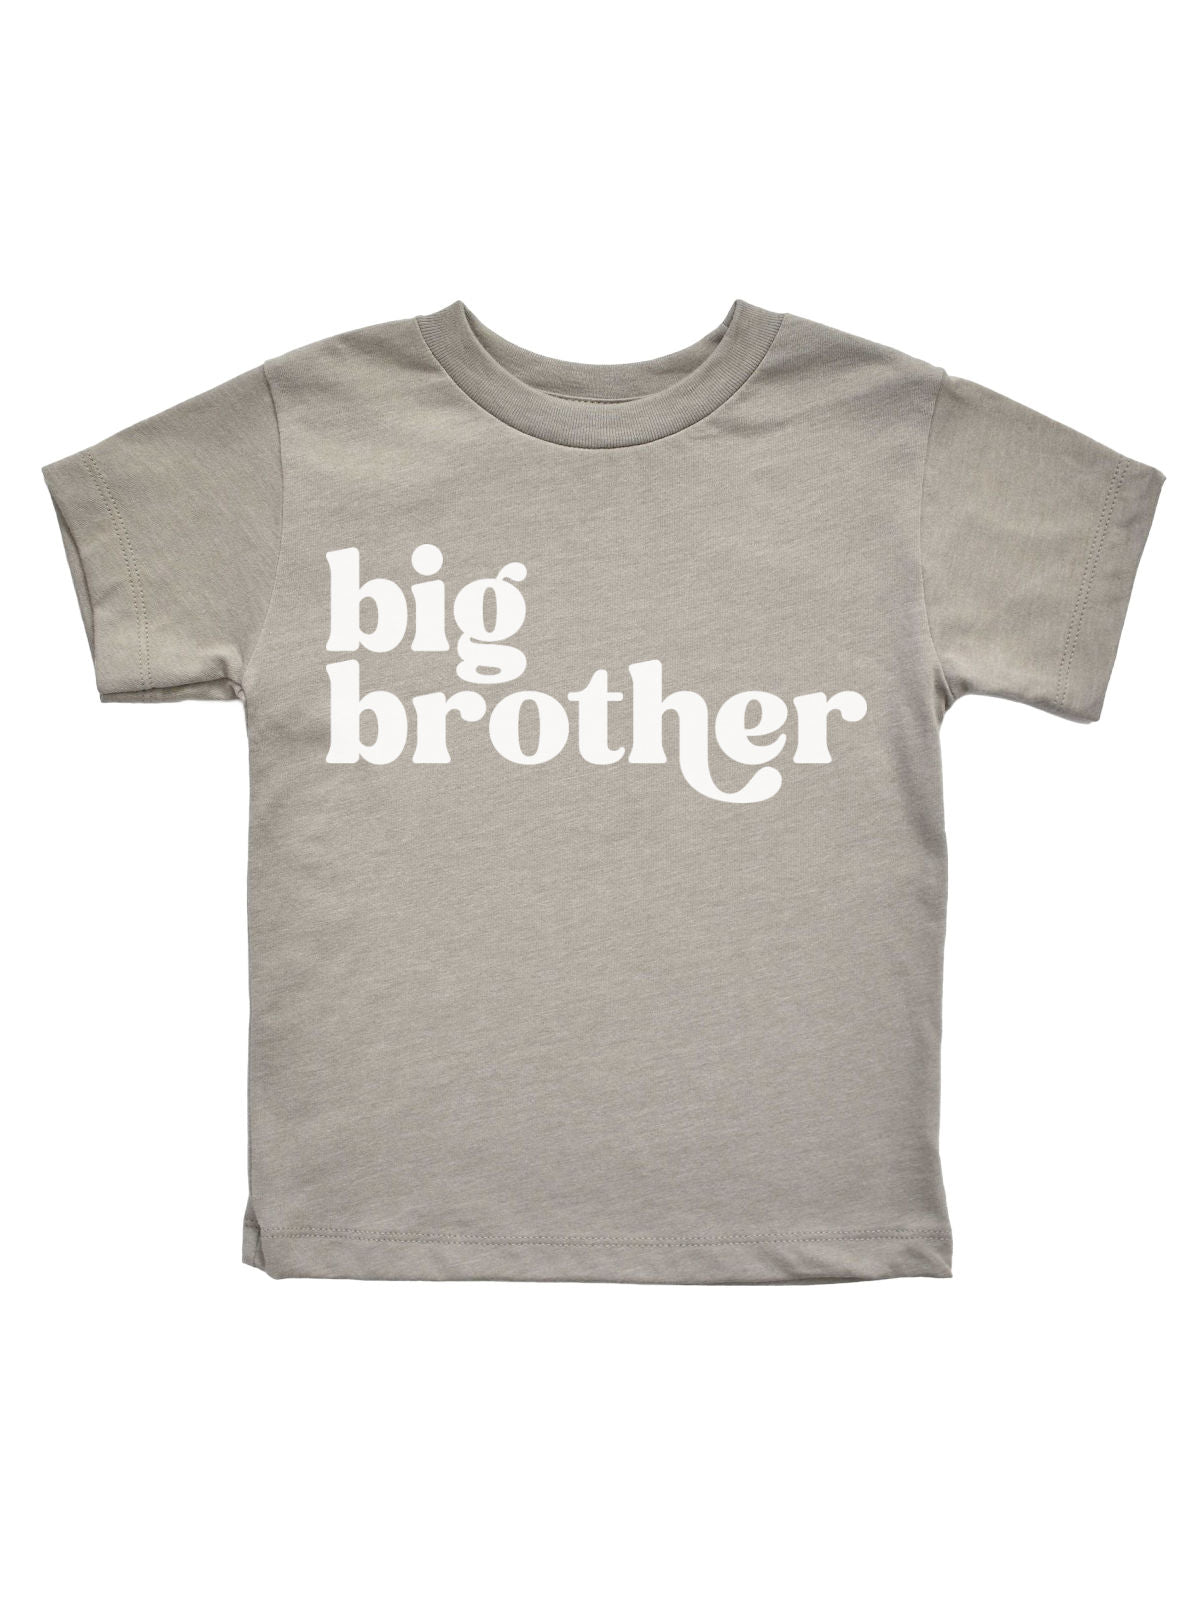 Big Brother Shirt for Boys in Heather Stone